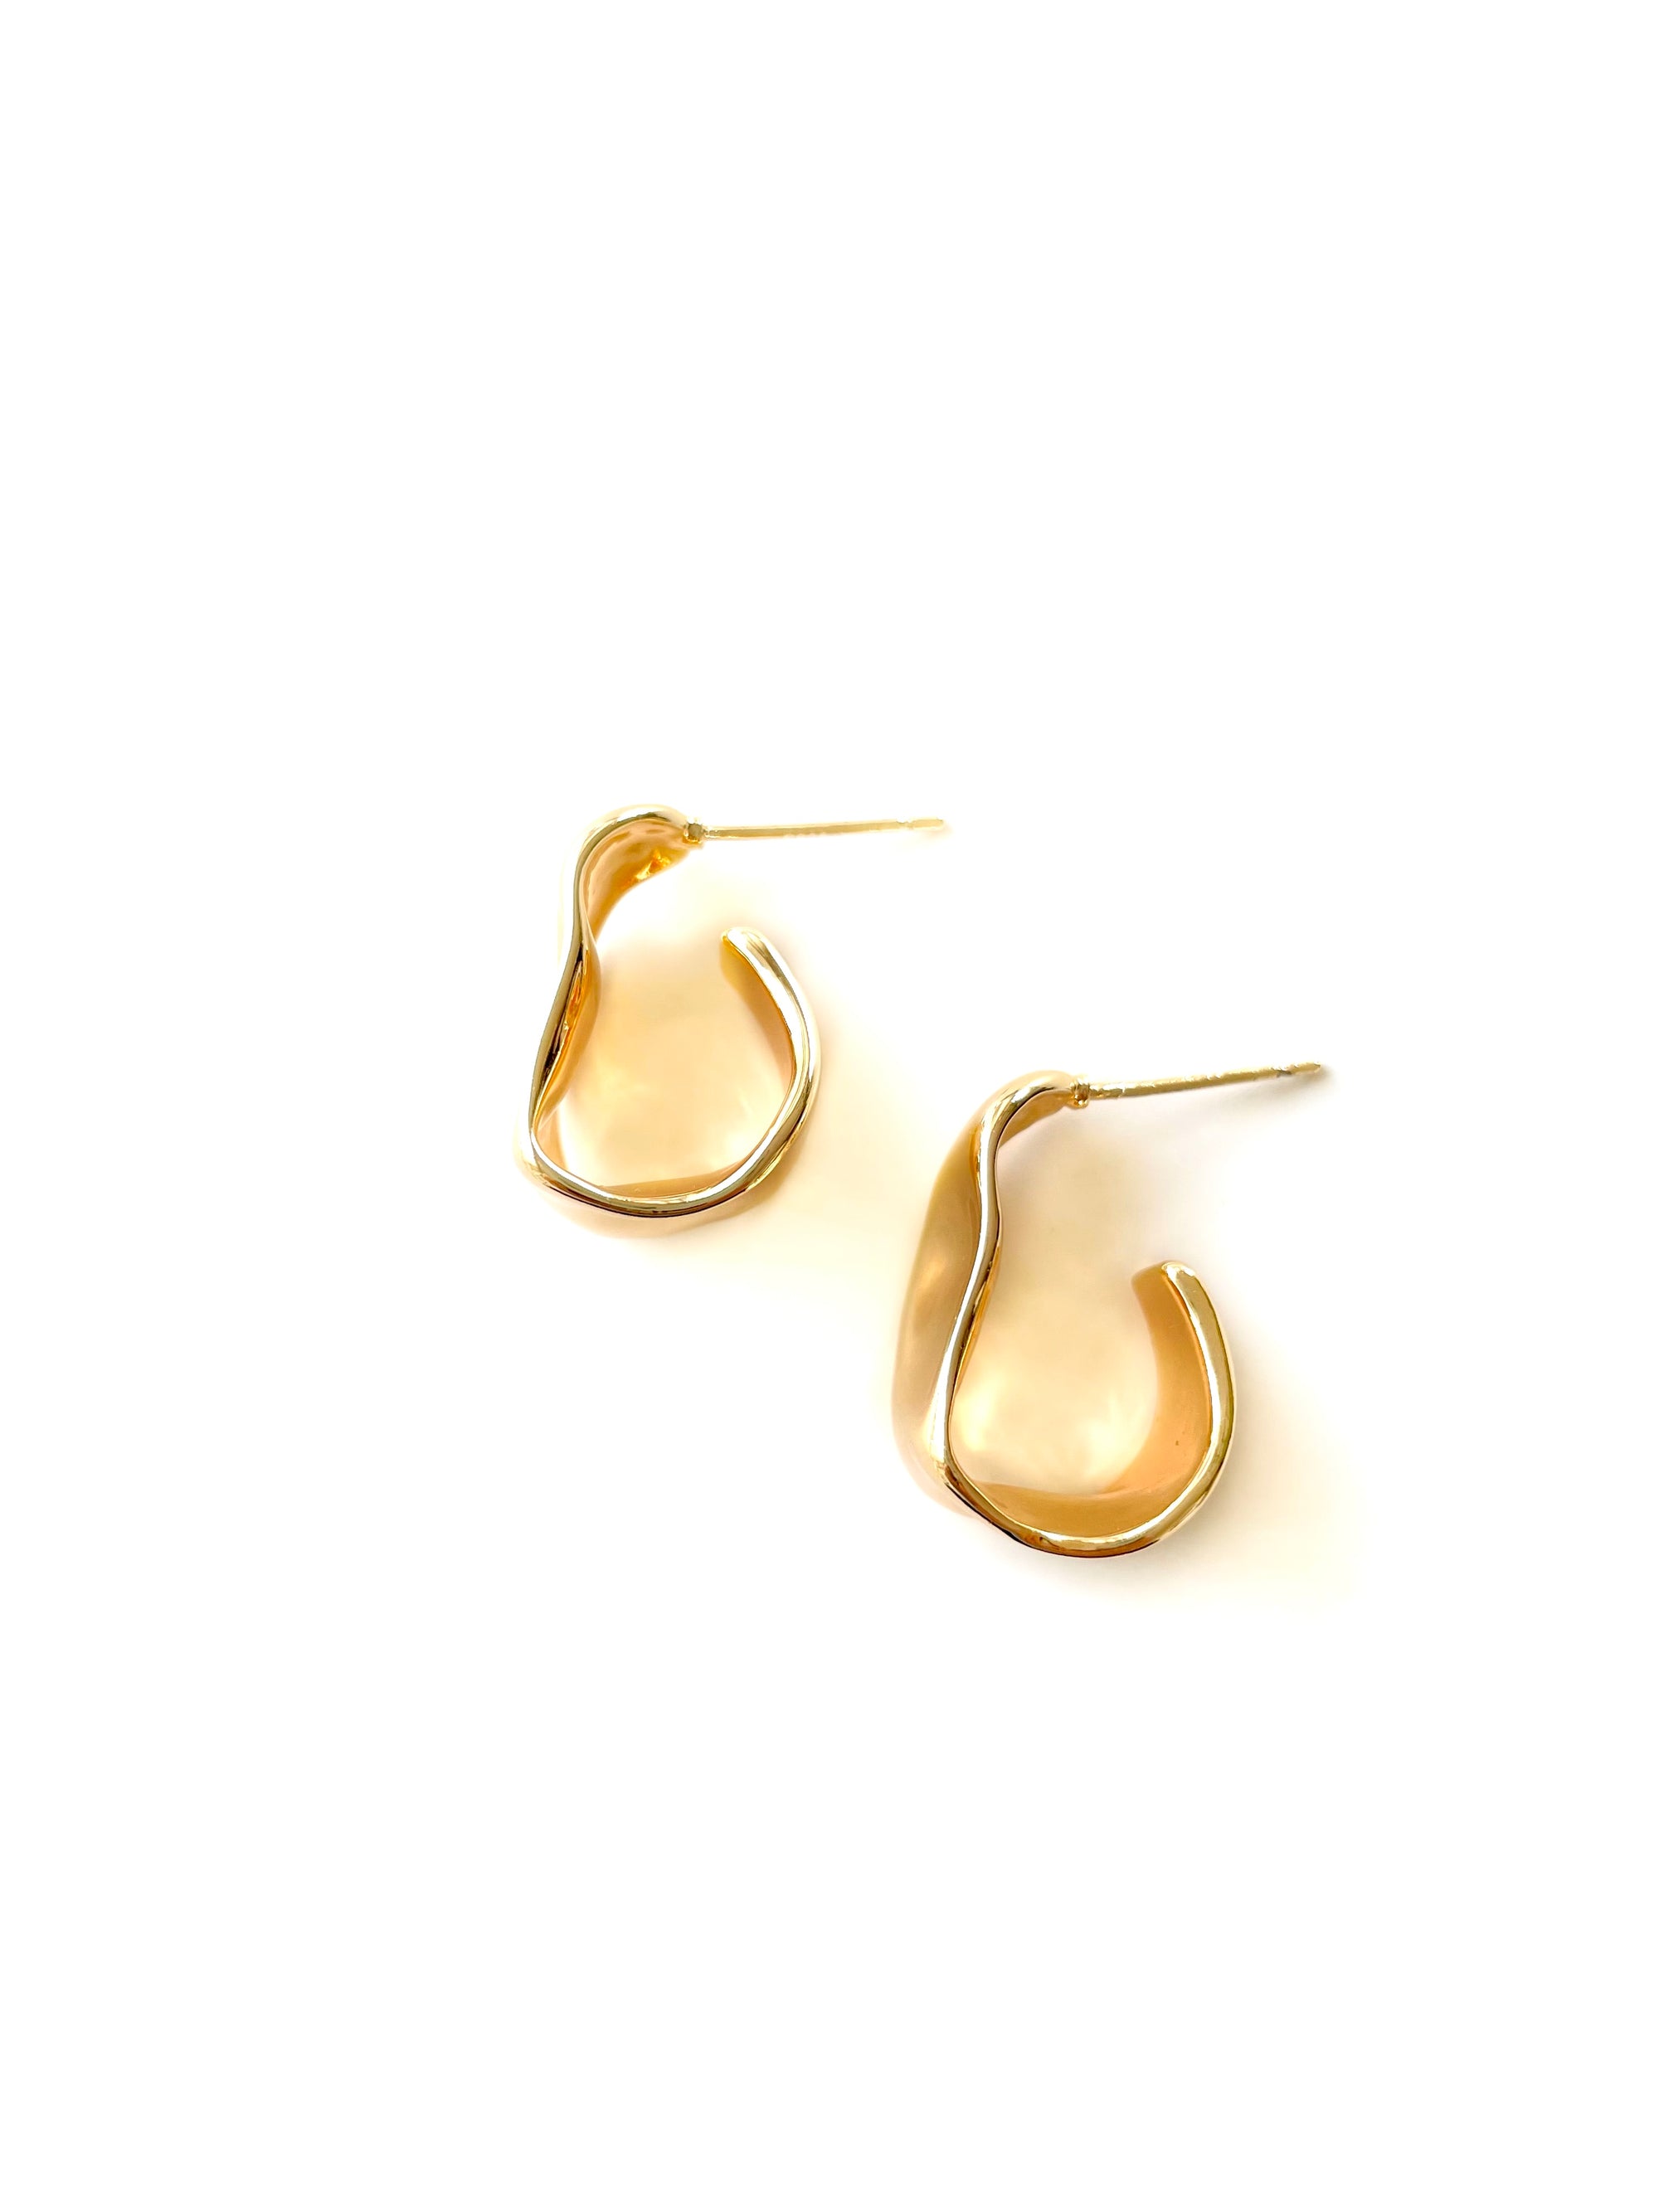 wavy open hoop earrings with a shiny finish and 18K gold plated italian brass earrings